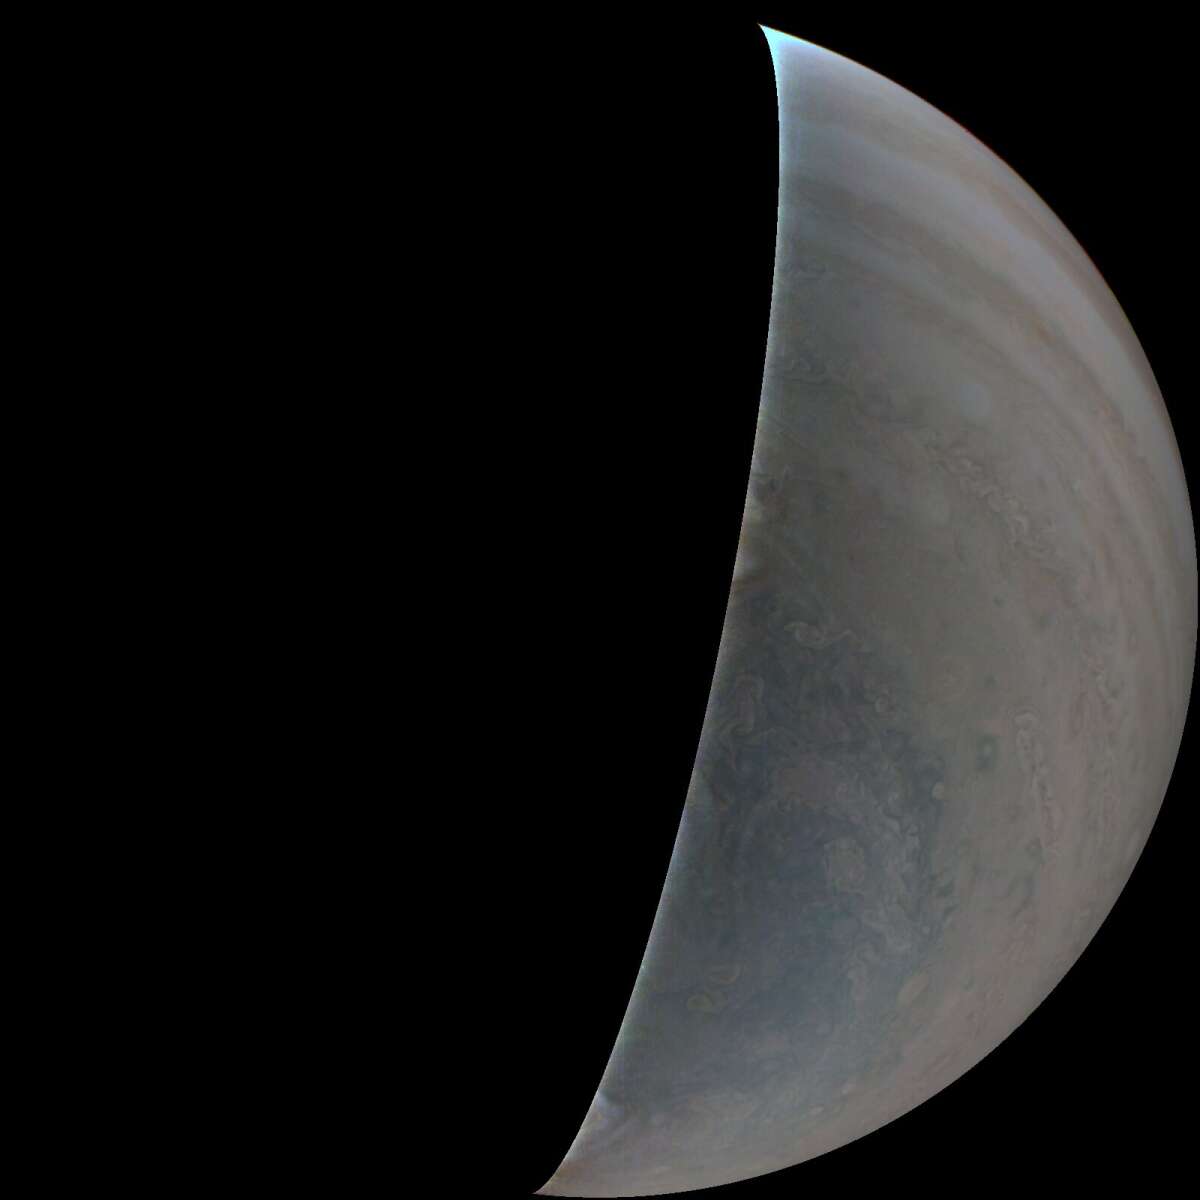 Juno mission team examines engineering data from the JunoCam camera after the 48th flyby of Jupiter